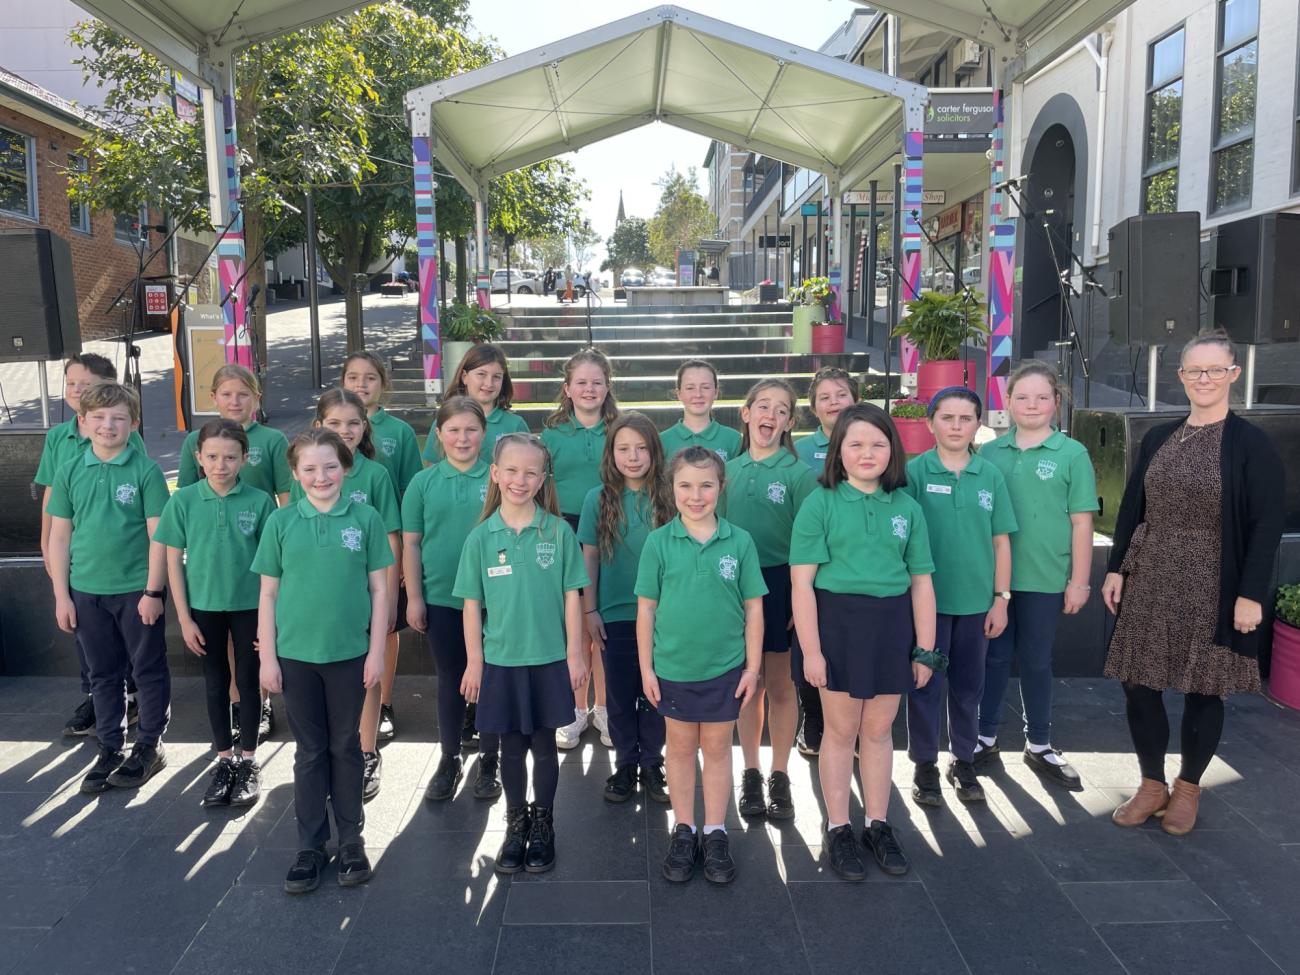 Primbee Public School Choir standing in front of the stage in school uniform for photo